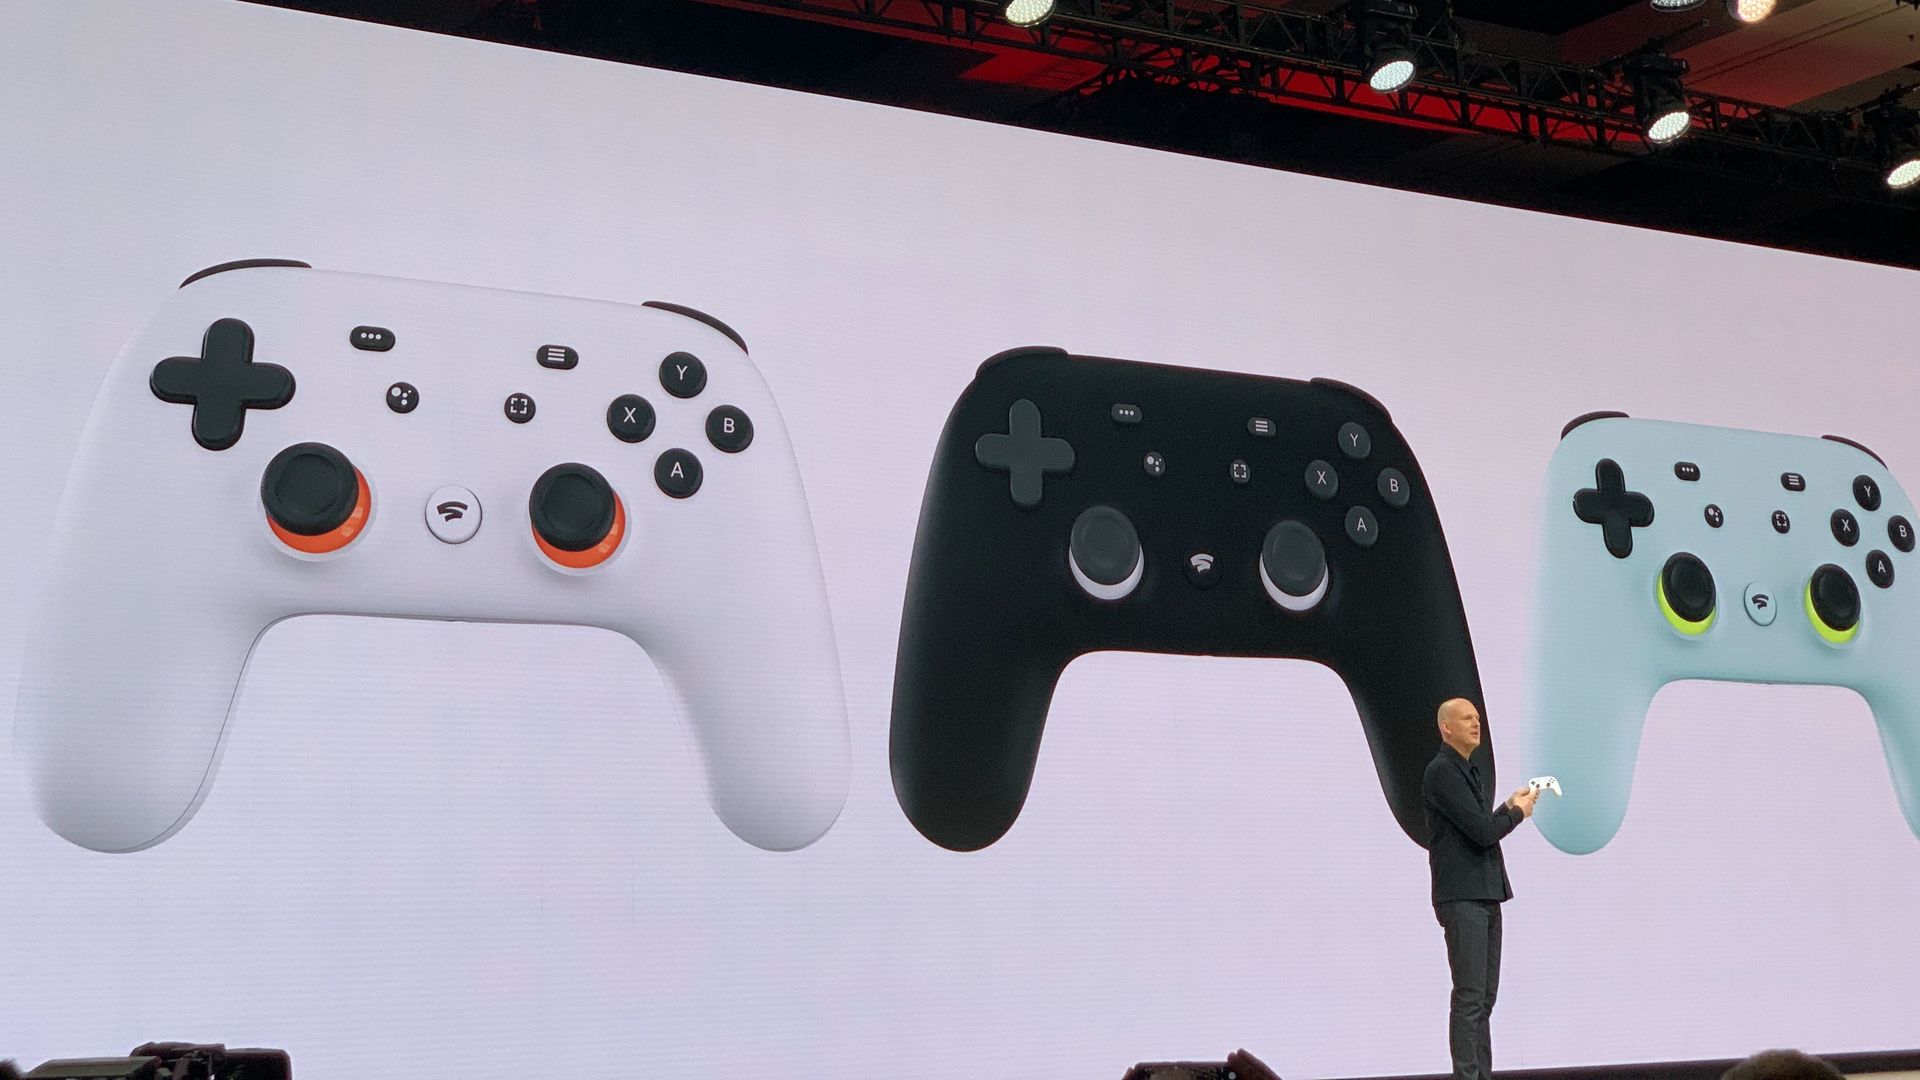 Google executive standing before projection of Google's new Stadia game controller